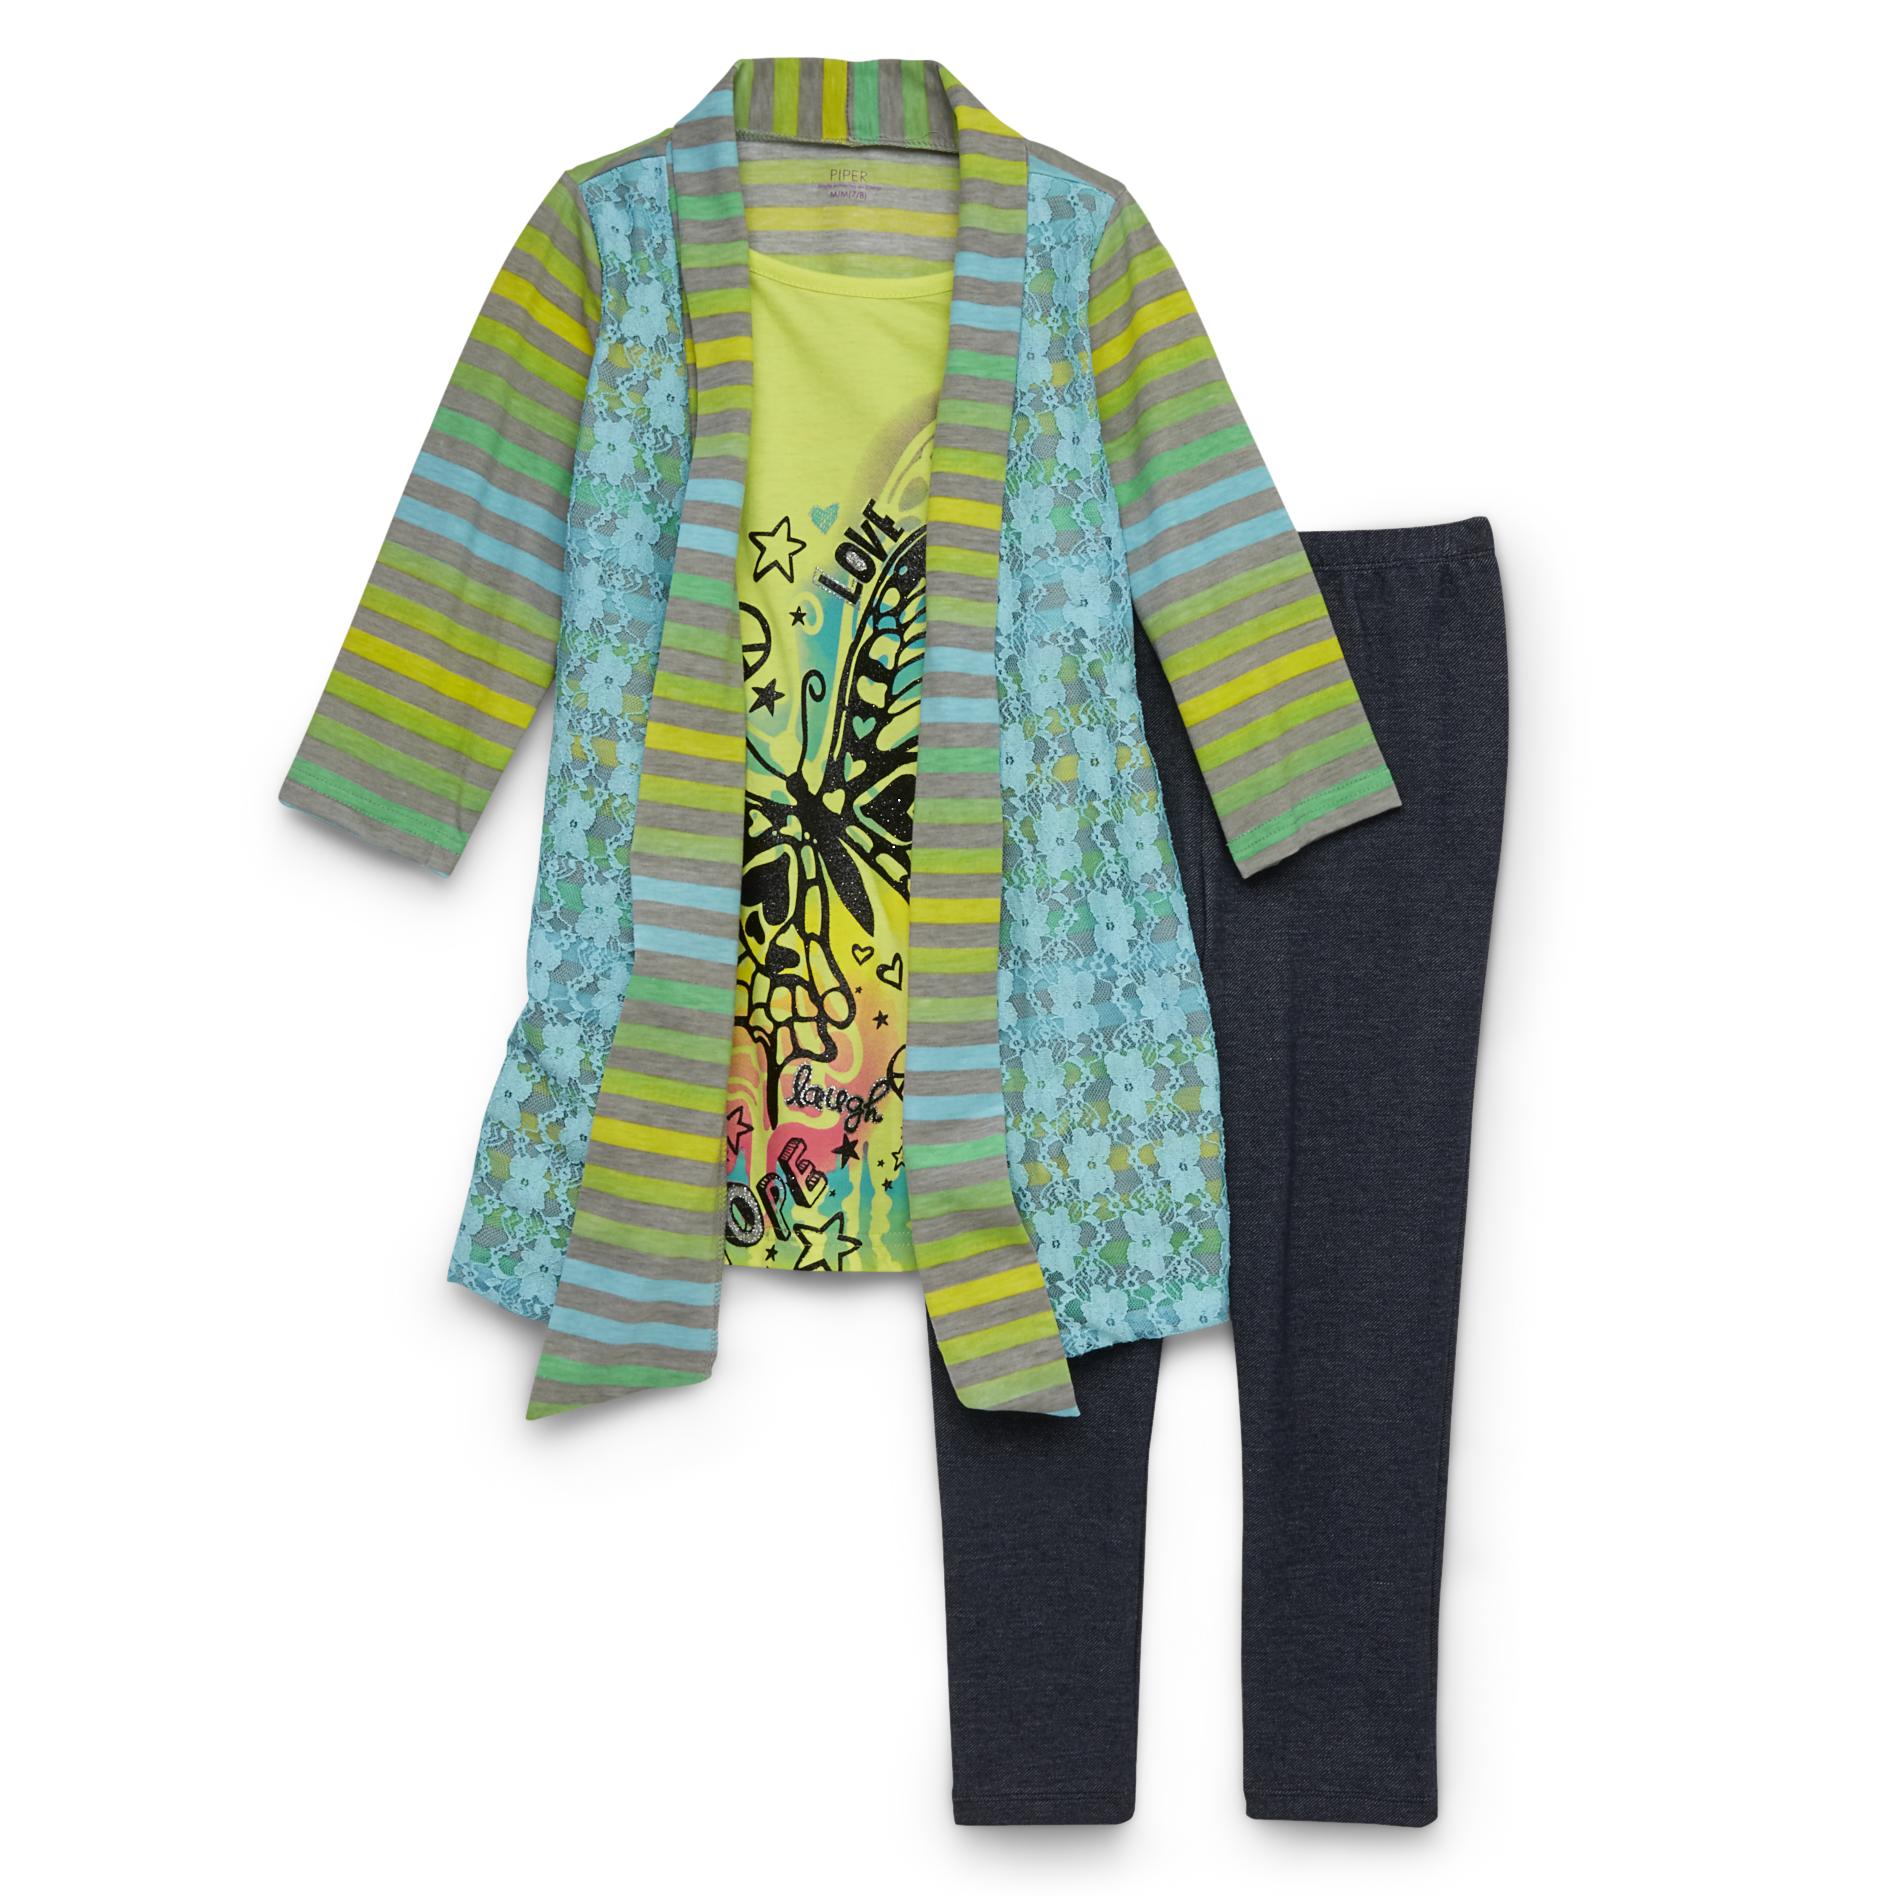 Piper Girl's Tunic Top & Leggings - Peace Signs & Butterfly